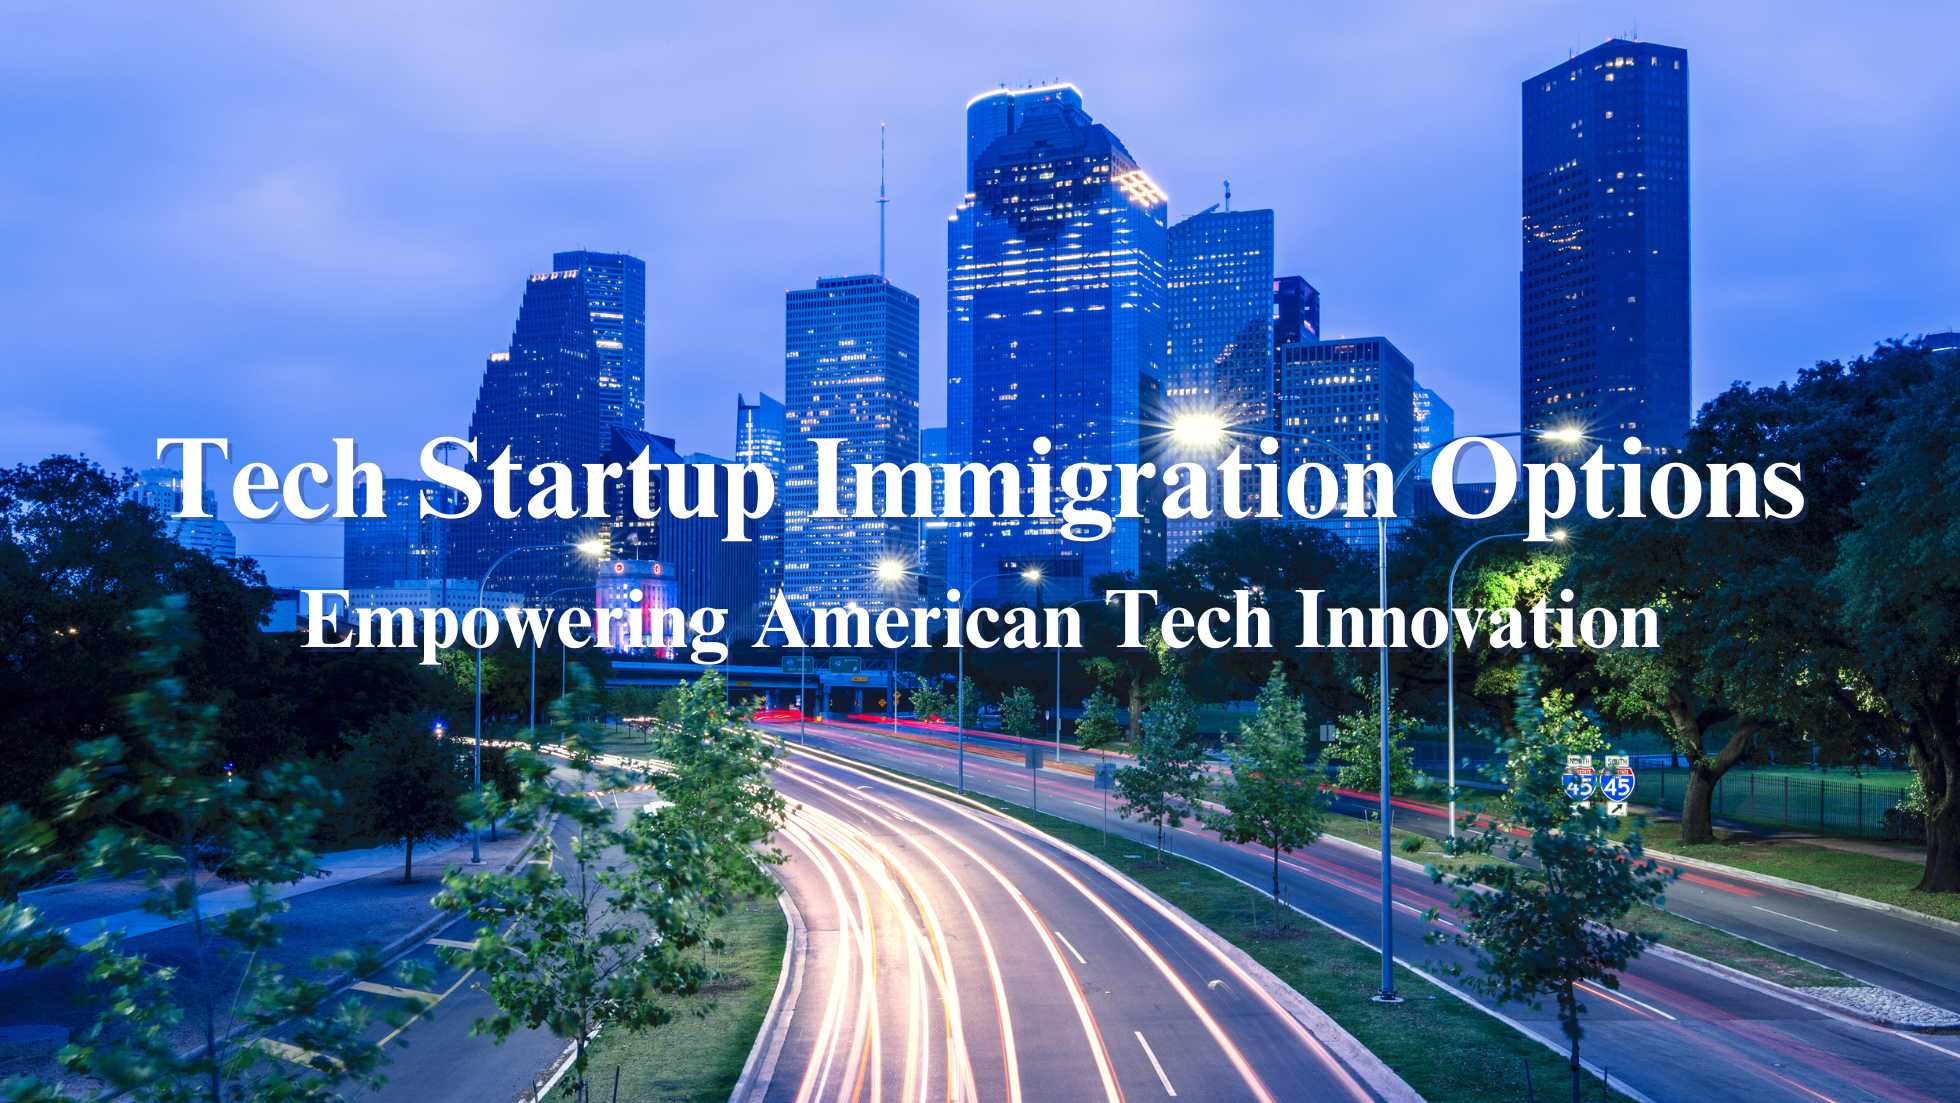 Tech Startup Immigration Options: Empowering American Tech Innovation